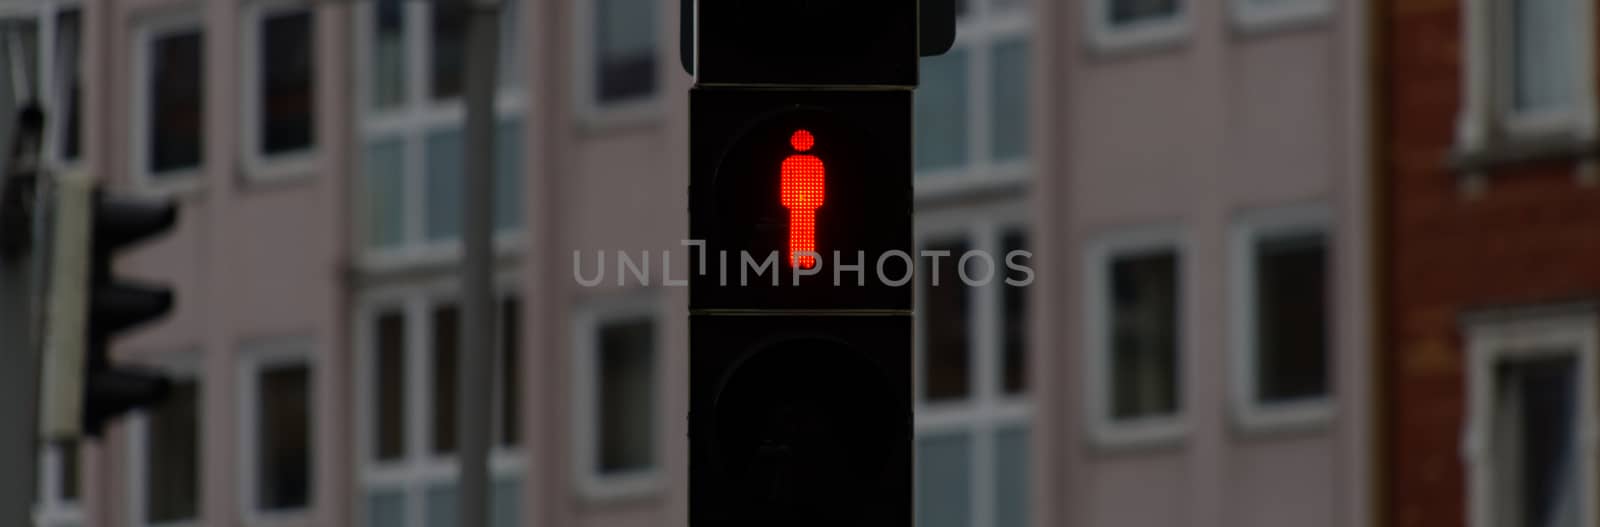 Standstill, red traffic light for pedestrians to stop sign and stop walking, background is blurred by fading depth of field, abstract